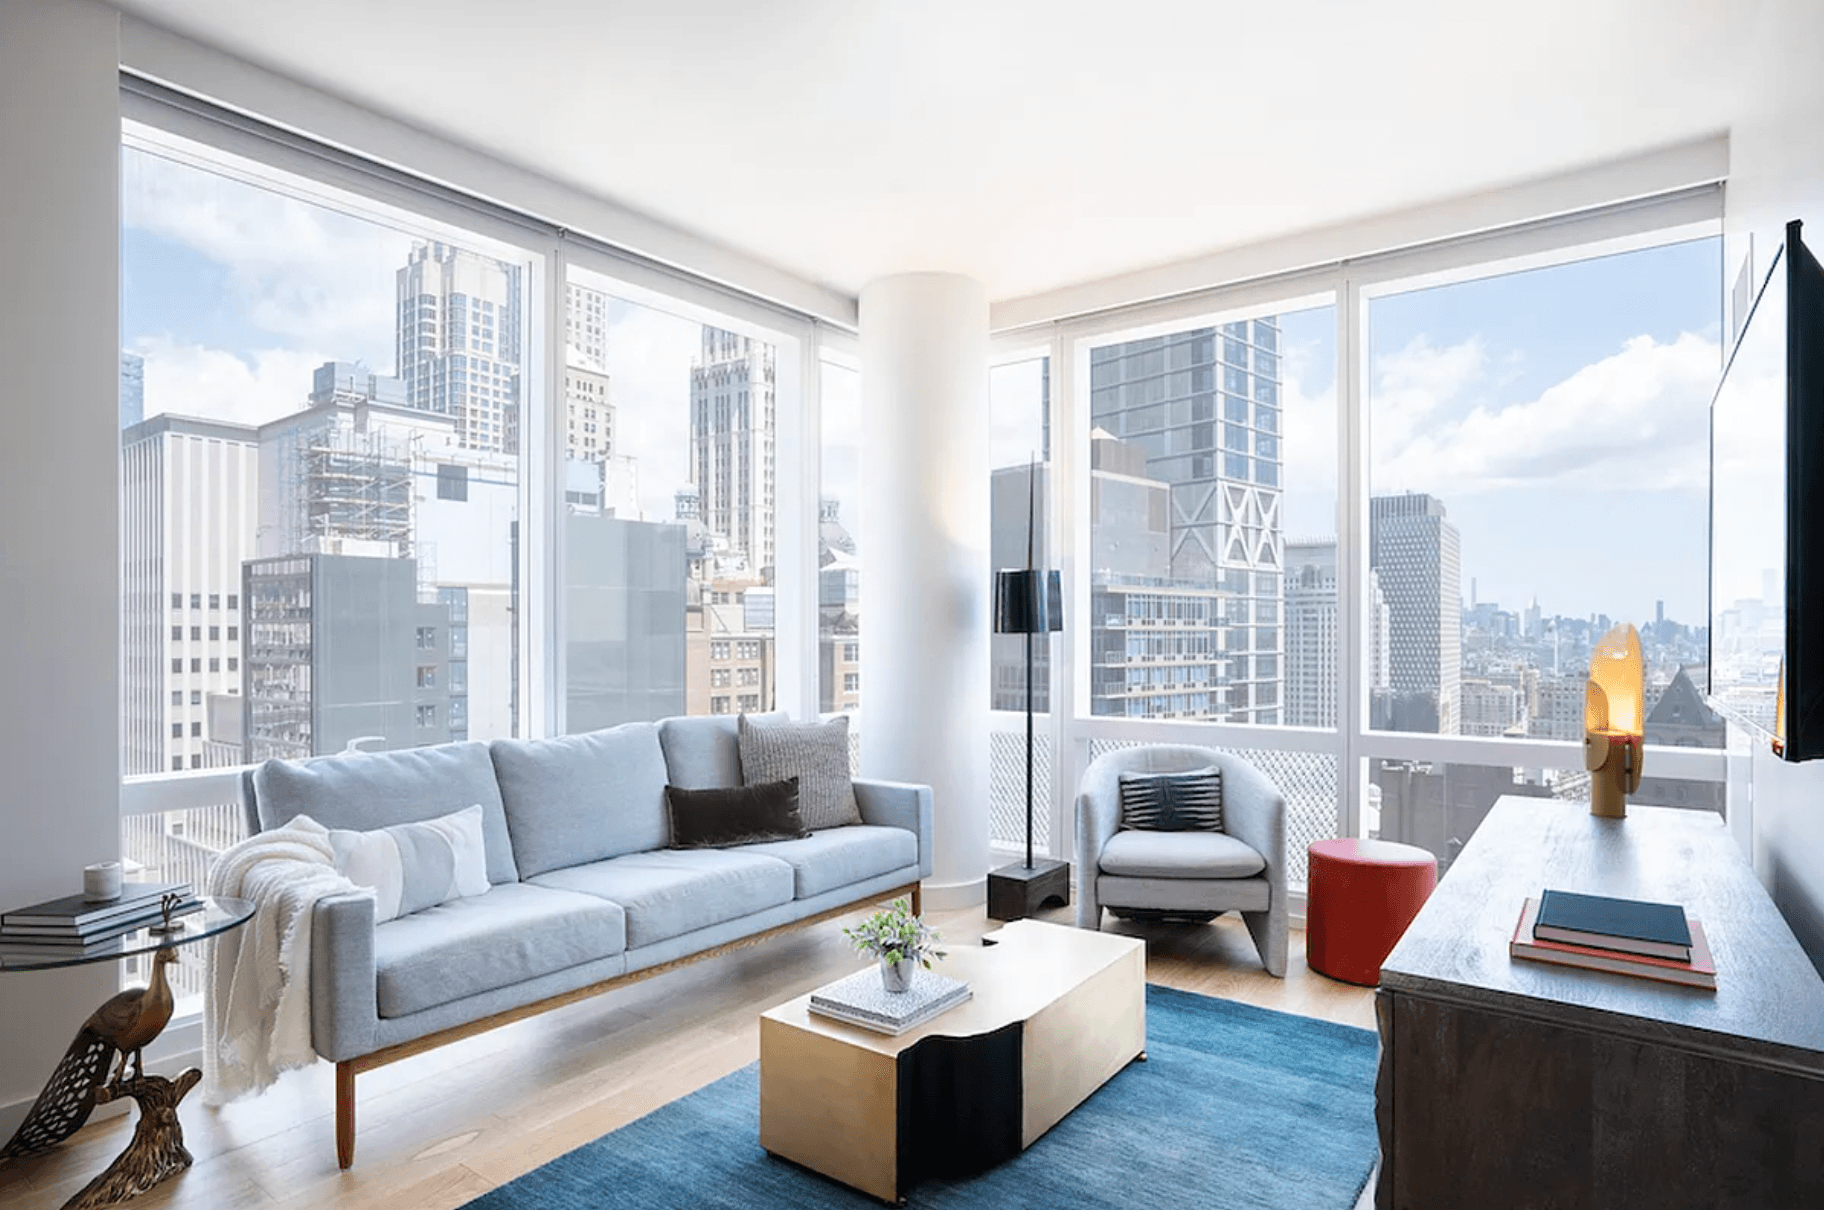 EXQUISITE 1 BR/1BA IN LUXURY AMENITY FILLED FINANCIAL DISTRICT BUILDING